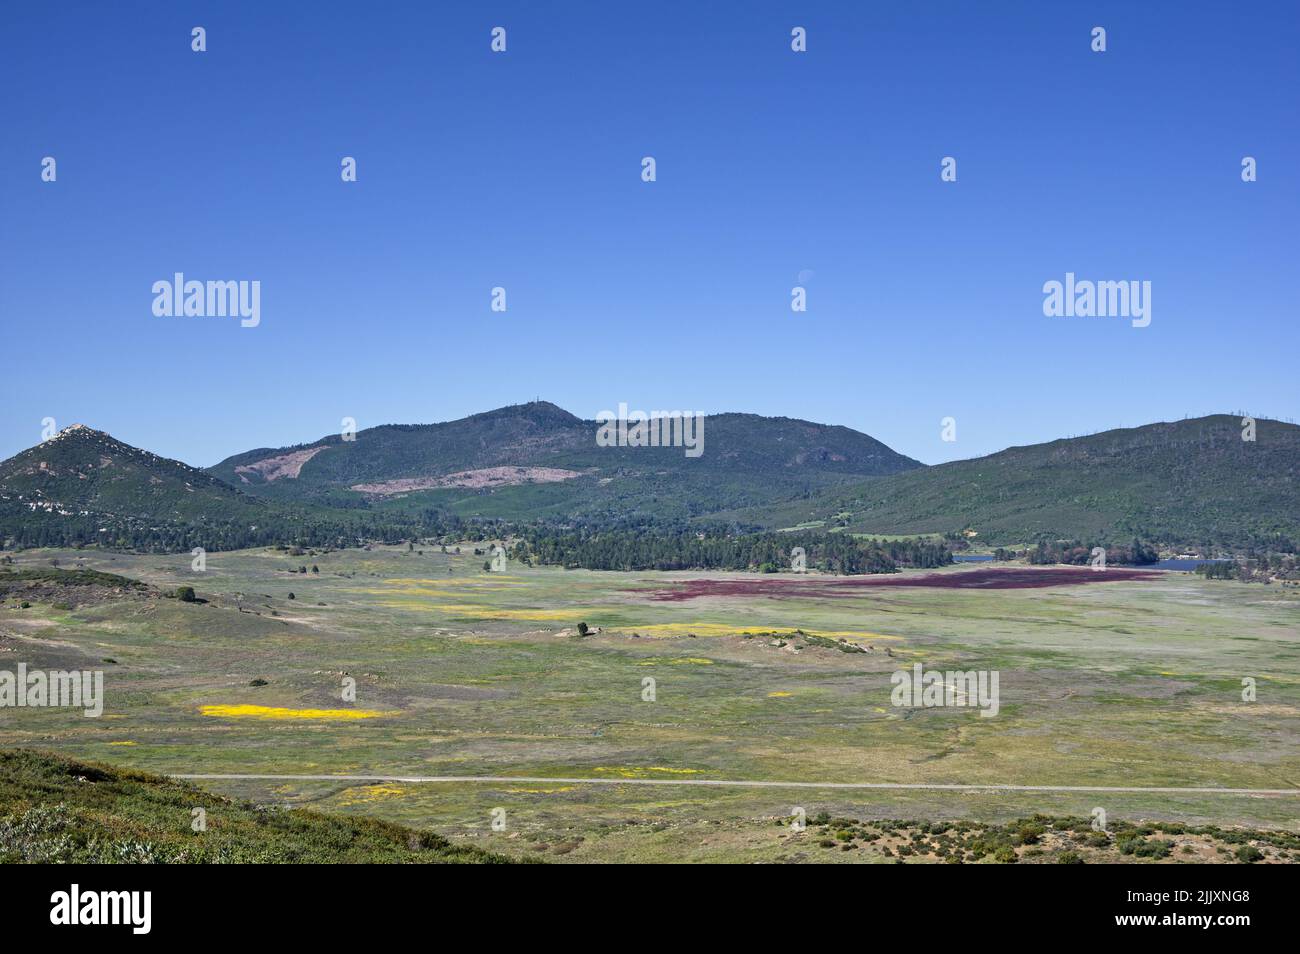 Cuyamaca Peak along with Stonewall Peak and Middle Peak in Cuyamaca State Park in Southern California Stock Photo